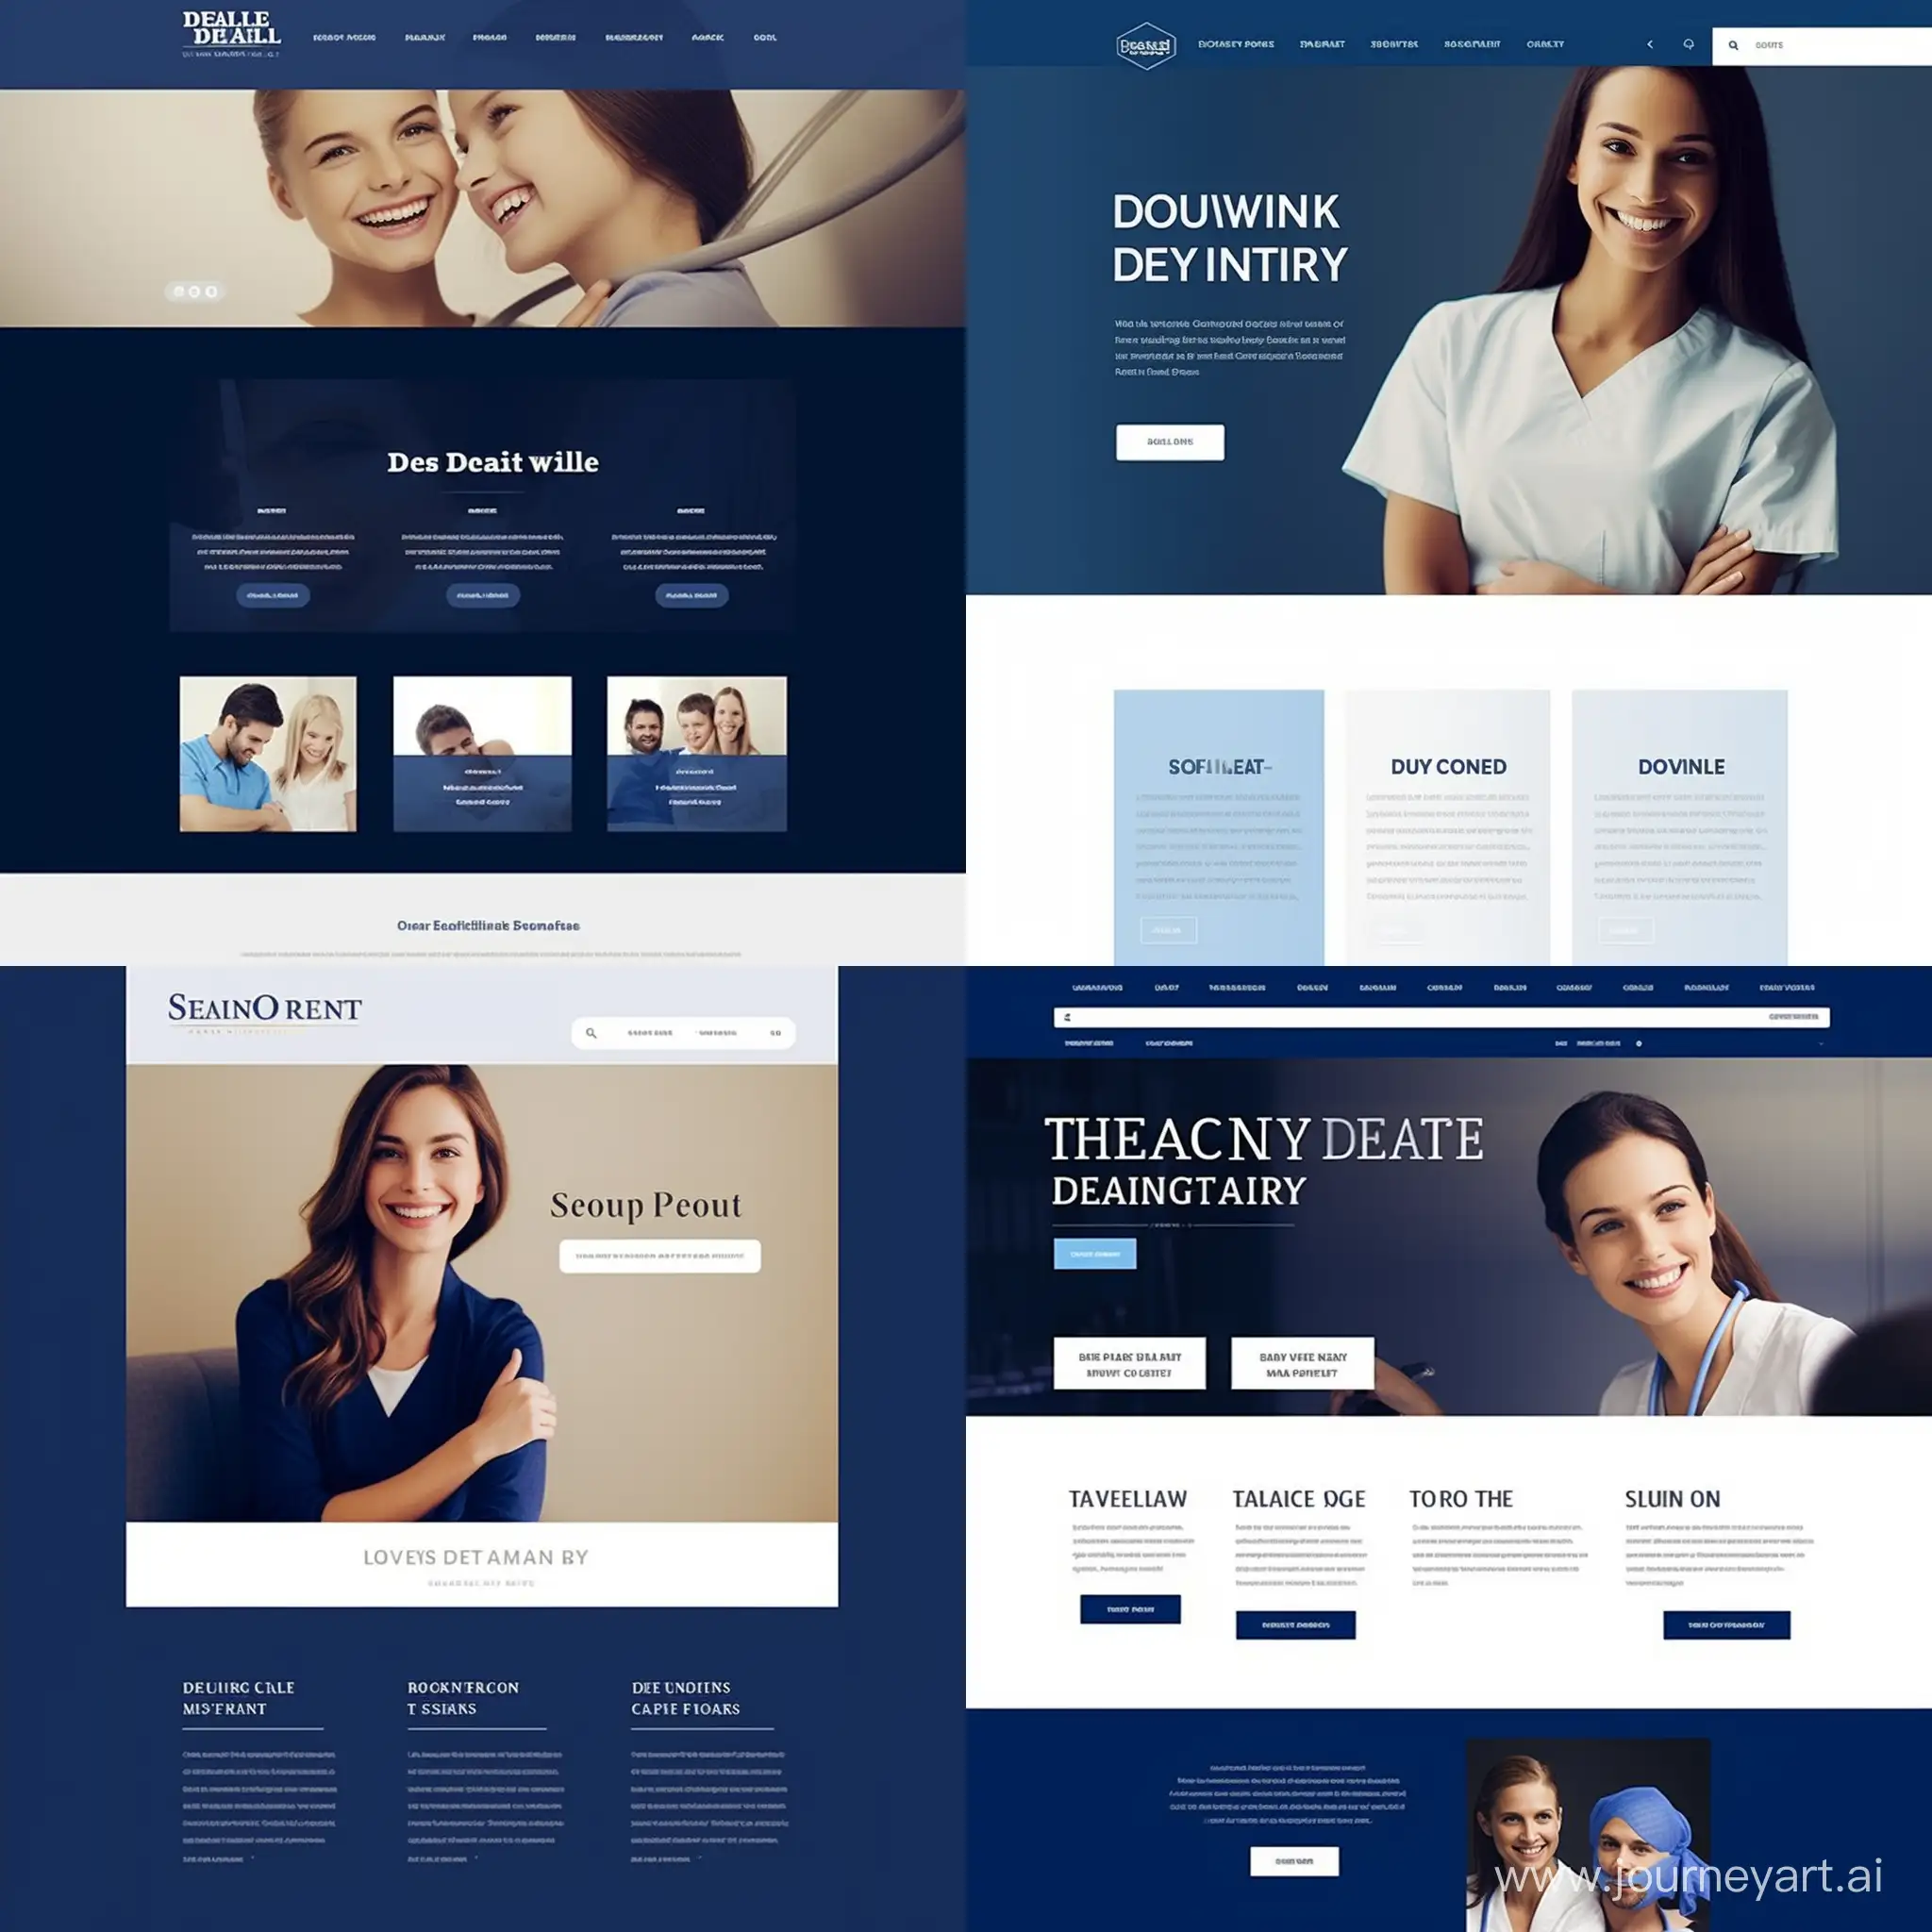 Design a sophisticated and professional web layout for a dental clinic. The primary color palette should consist of dark blue, black, and white. The homepage should feature a large, welcoming banner at the top with a dark blue background, showcasing a modern, clean dental clinic environment. Below the banner, arrange sections in a balanced layout for services offered, with high-quality images of dental equipment and staff in action, set against a black and white theme to create contrast. Include a navigation bar with a sleek design, using dark blue and white text for clear readability. Incorporate subtle graphical elements like tooth icons or dental instruments, stylized with the same color scheme. The footer should be elegant and simple, with contact information and social media links, set against a dark blue background. Overall, the design should convey a sense of cleanliness, trust, and professionalism, suitable for a high-end dental clinic.